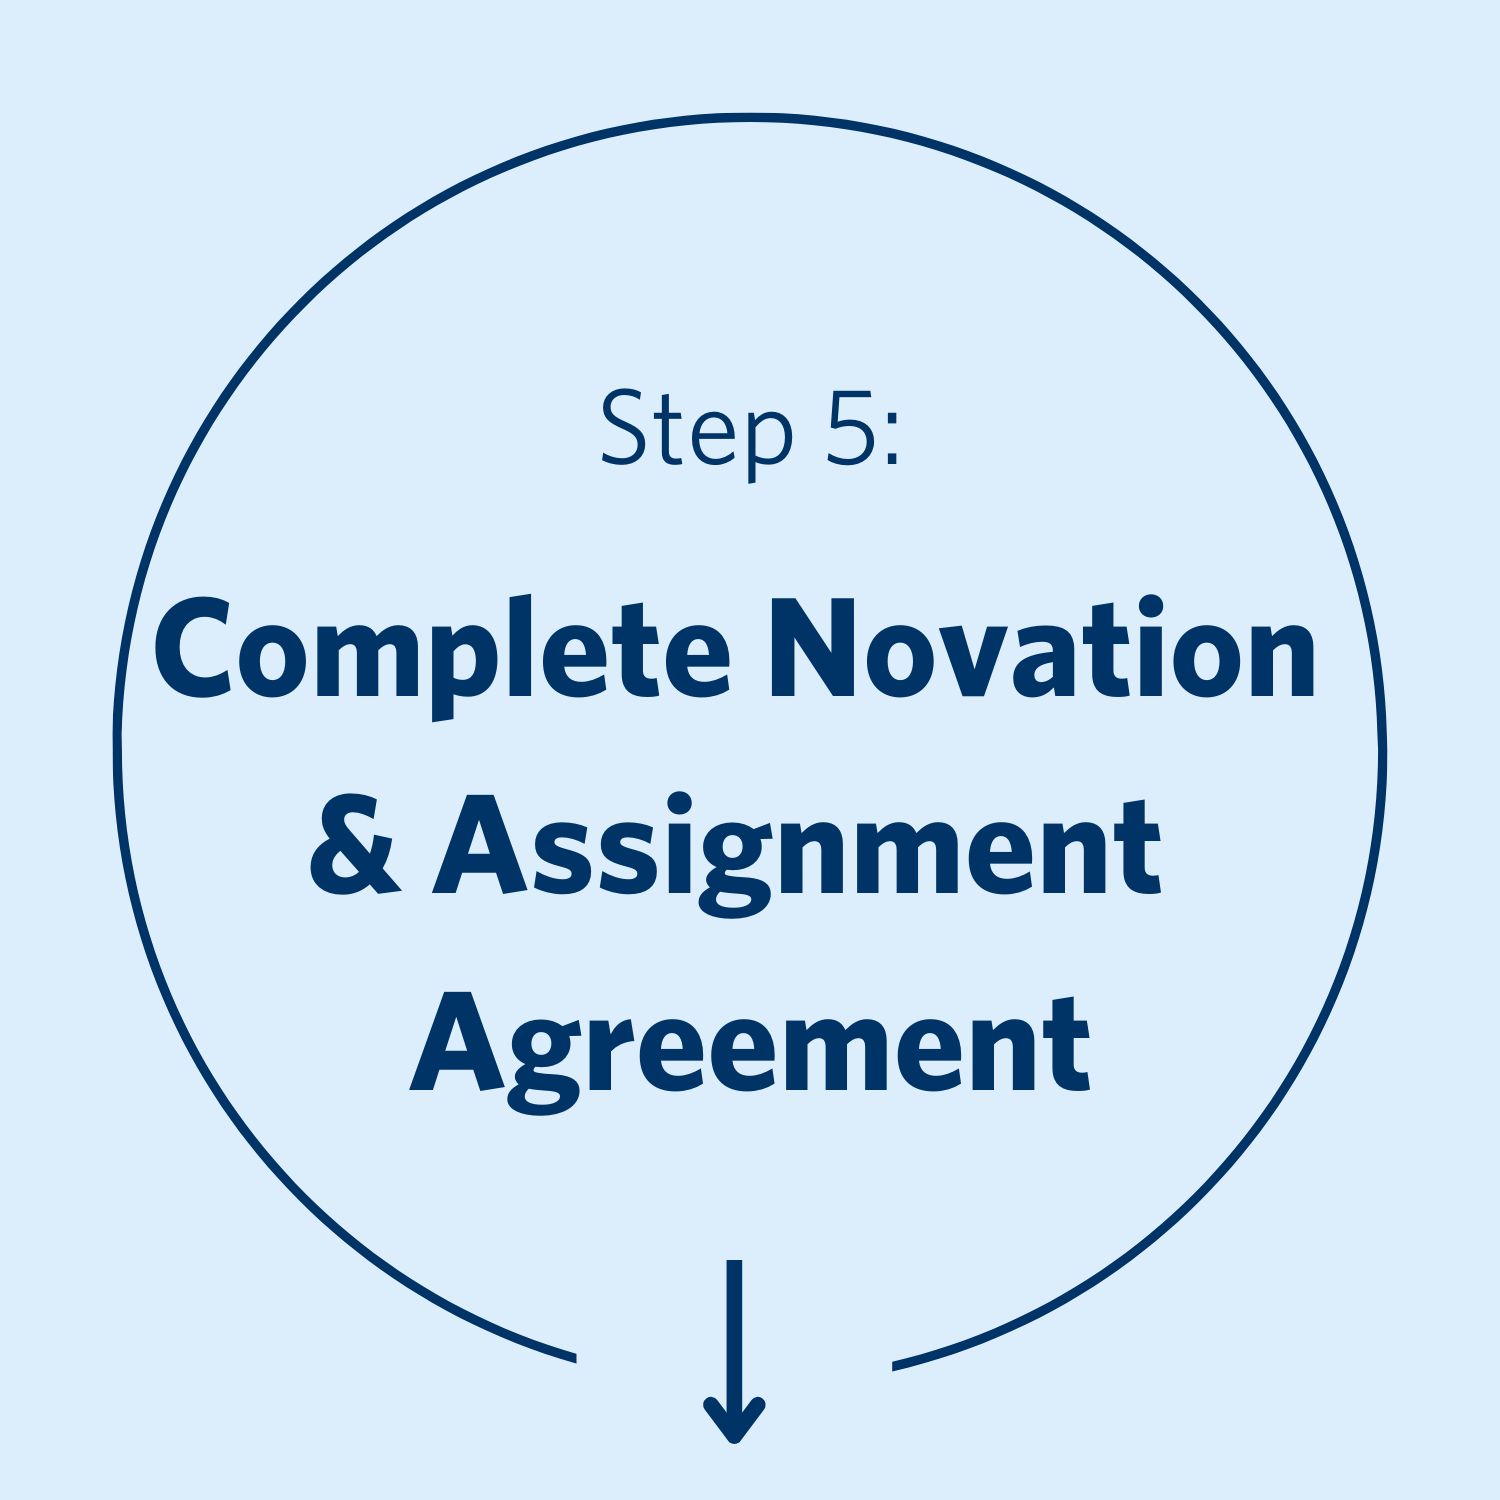 Step 5; Complete Novation and Assignment Agreement